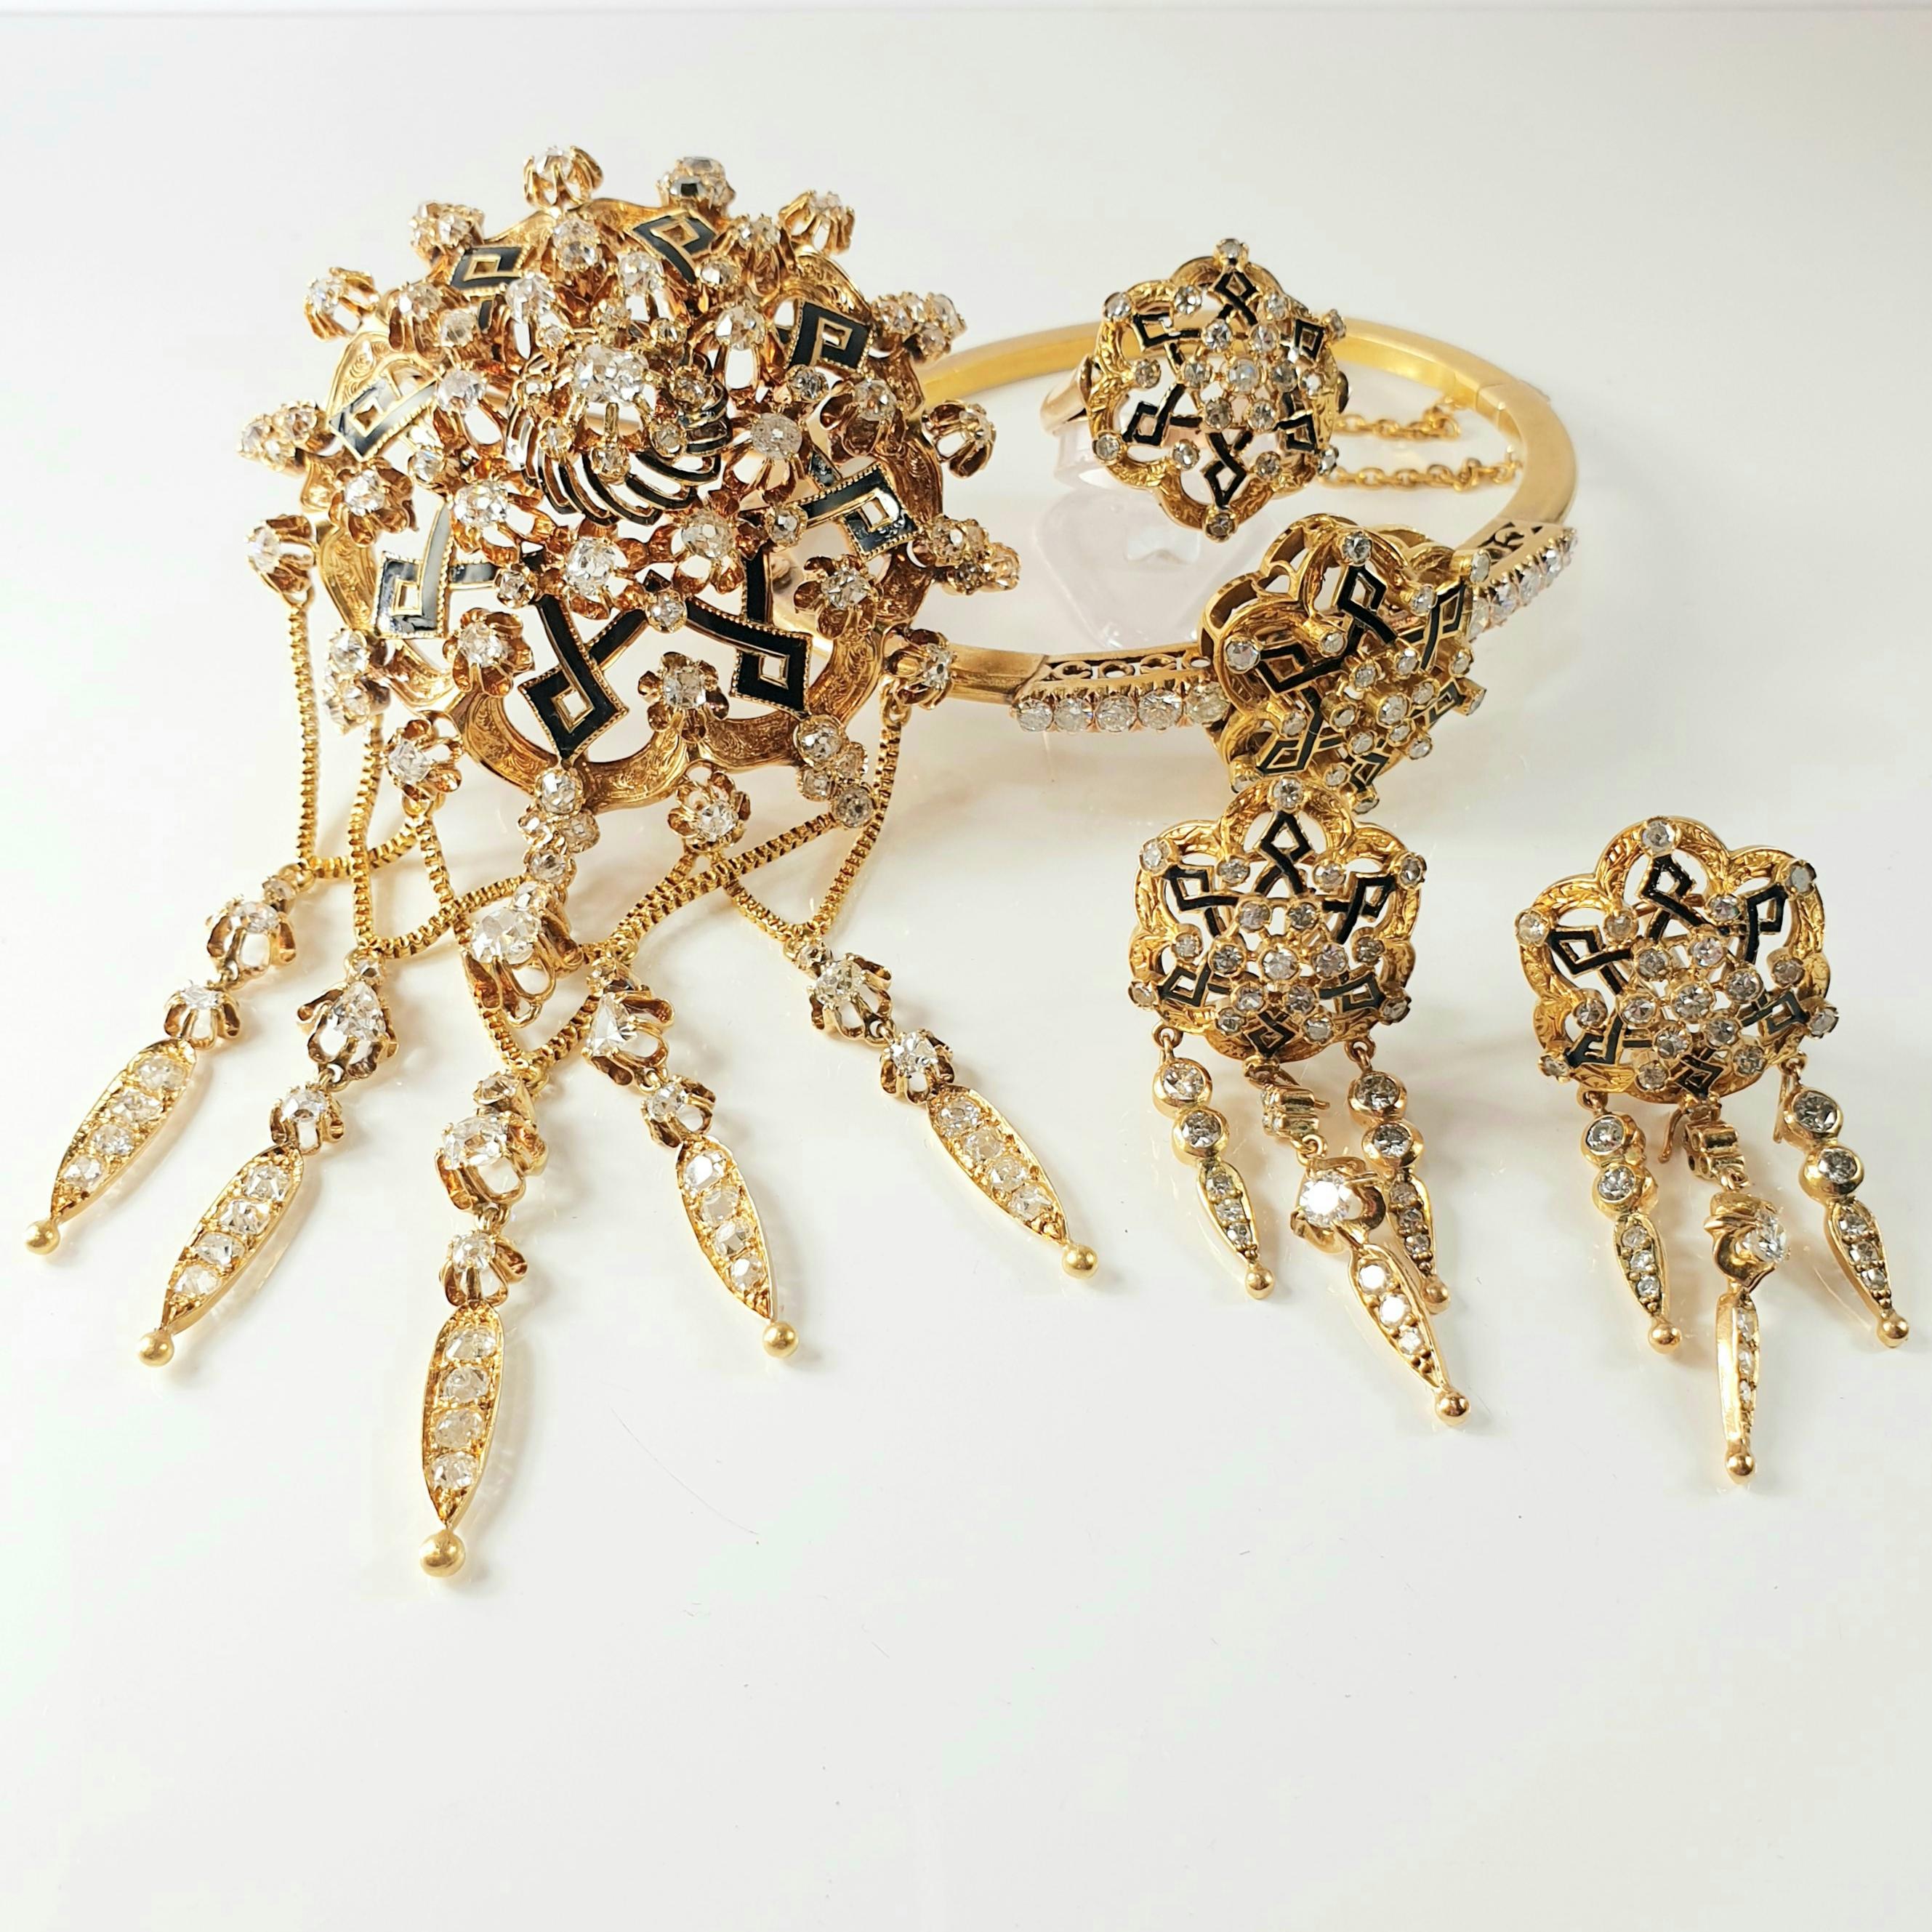 Important 1860s Spanish Elizabethan Renaissance  Brooch, Earrings and  Ring and Bracelet Jewelry Set.  
Mounted in 18kt gold with geometric motifs in enamel and diamonds 
Making a central rose with diamond fringes hanging to make a nice floral